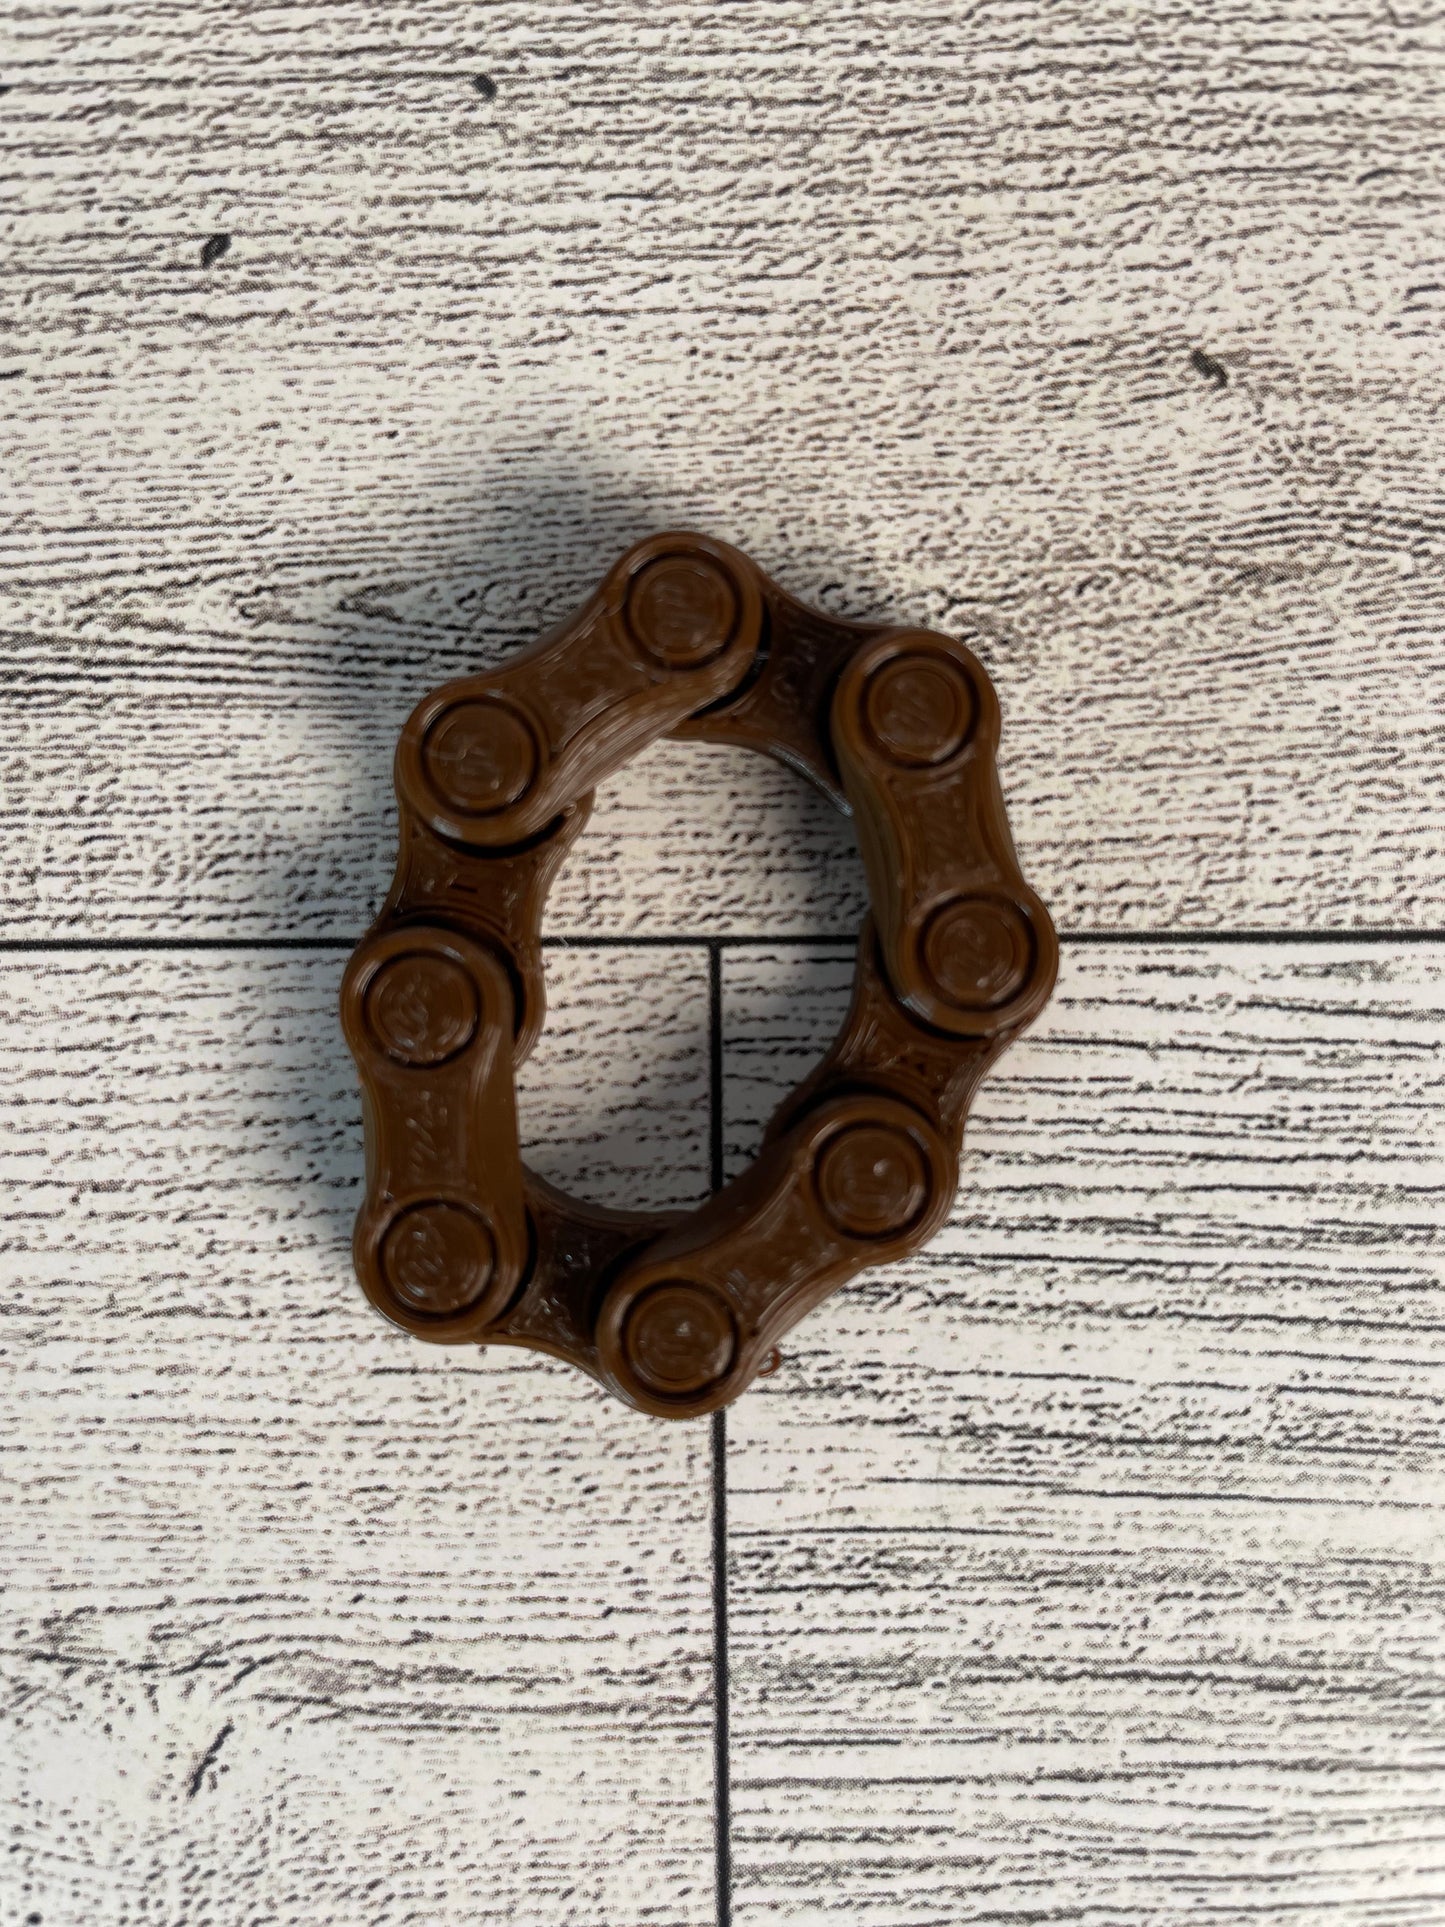 A brown chain link on a wood backdrop. The chain is arranged in a circle shape and there are four links